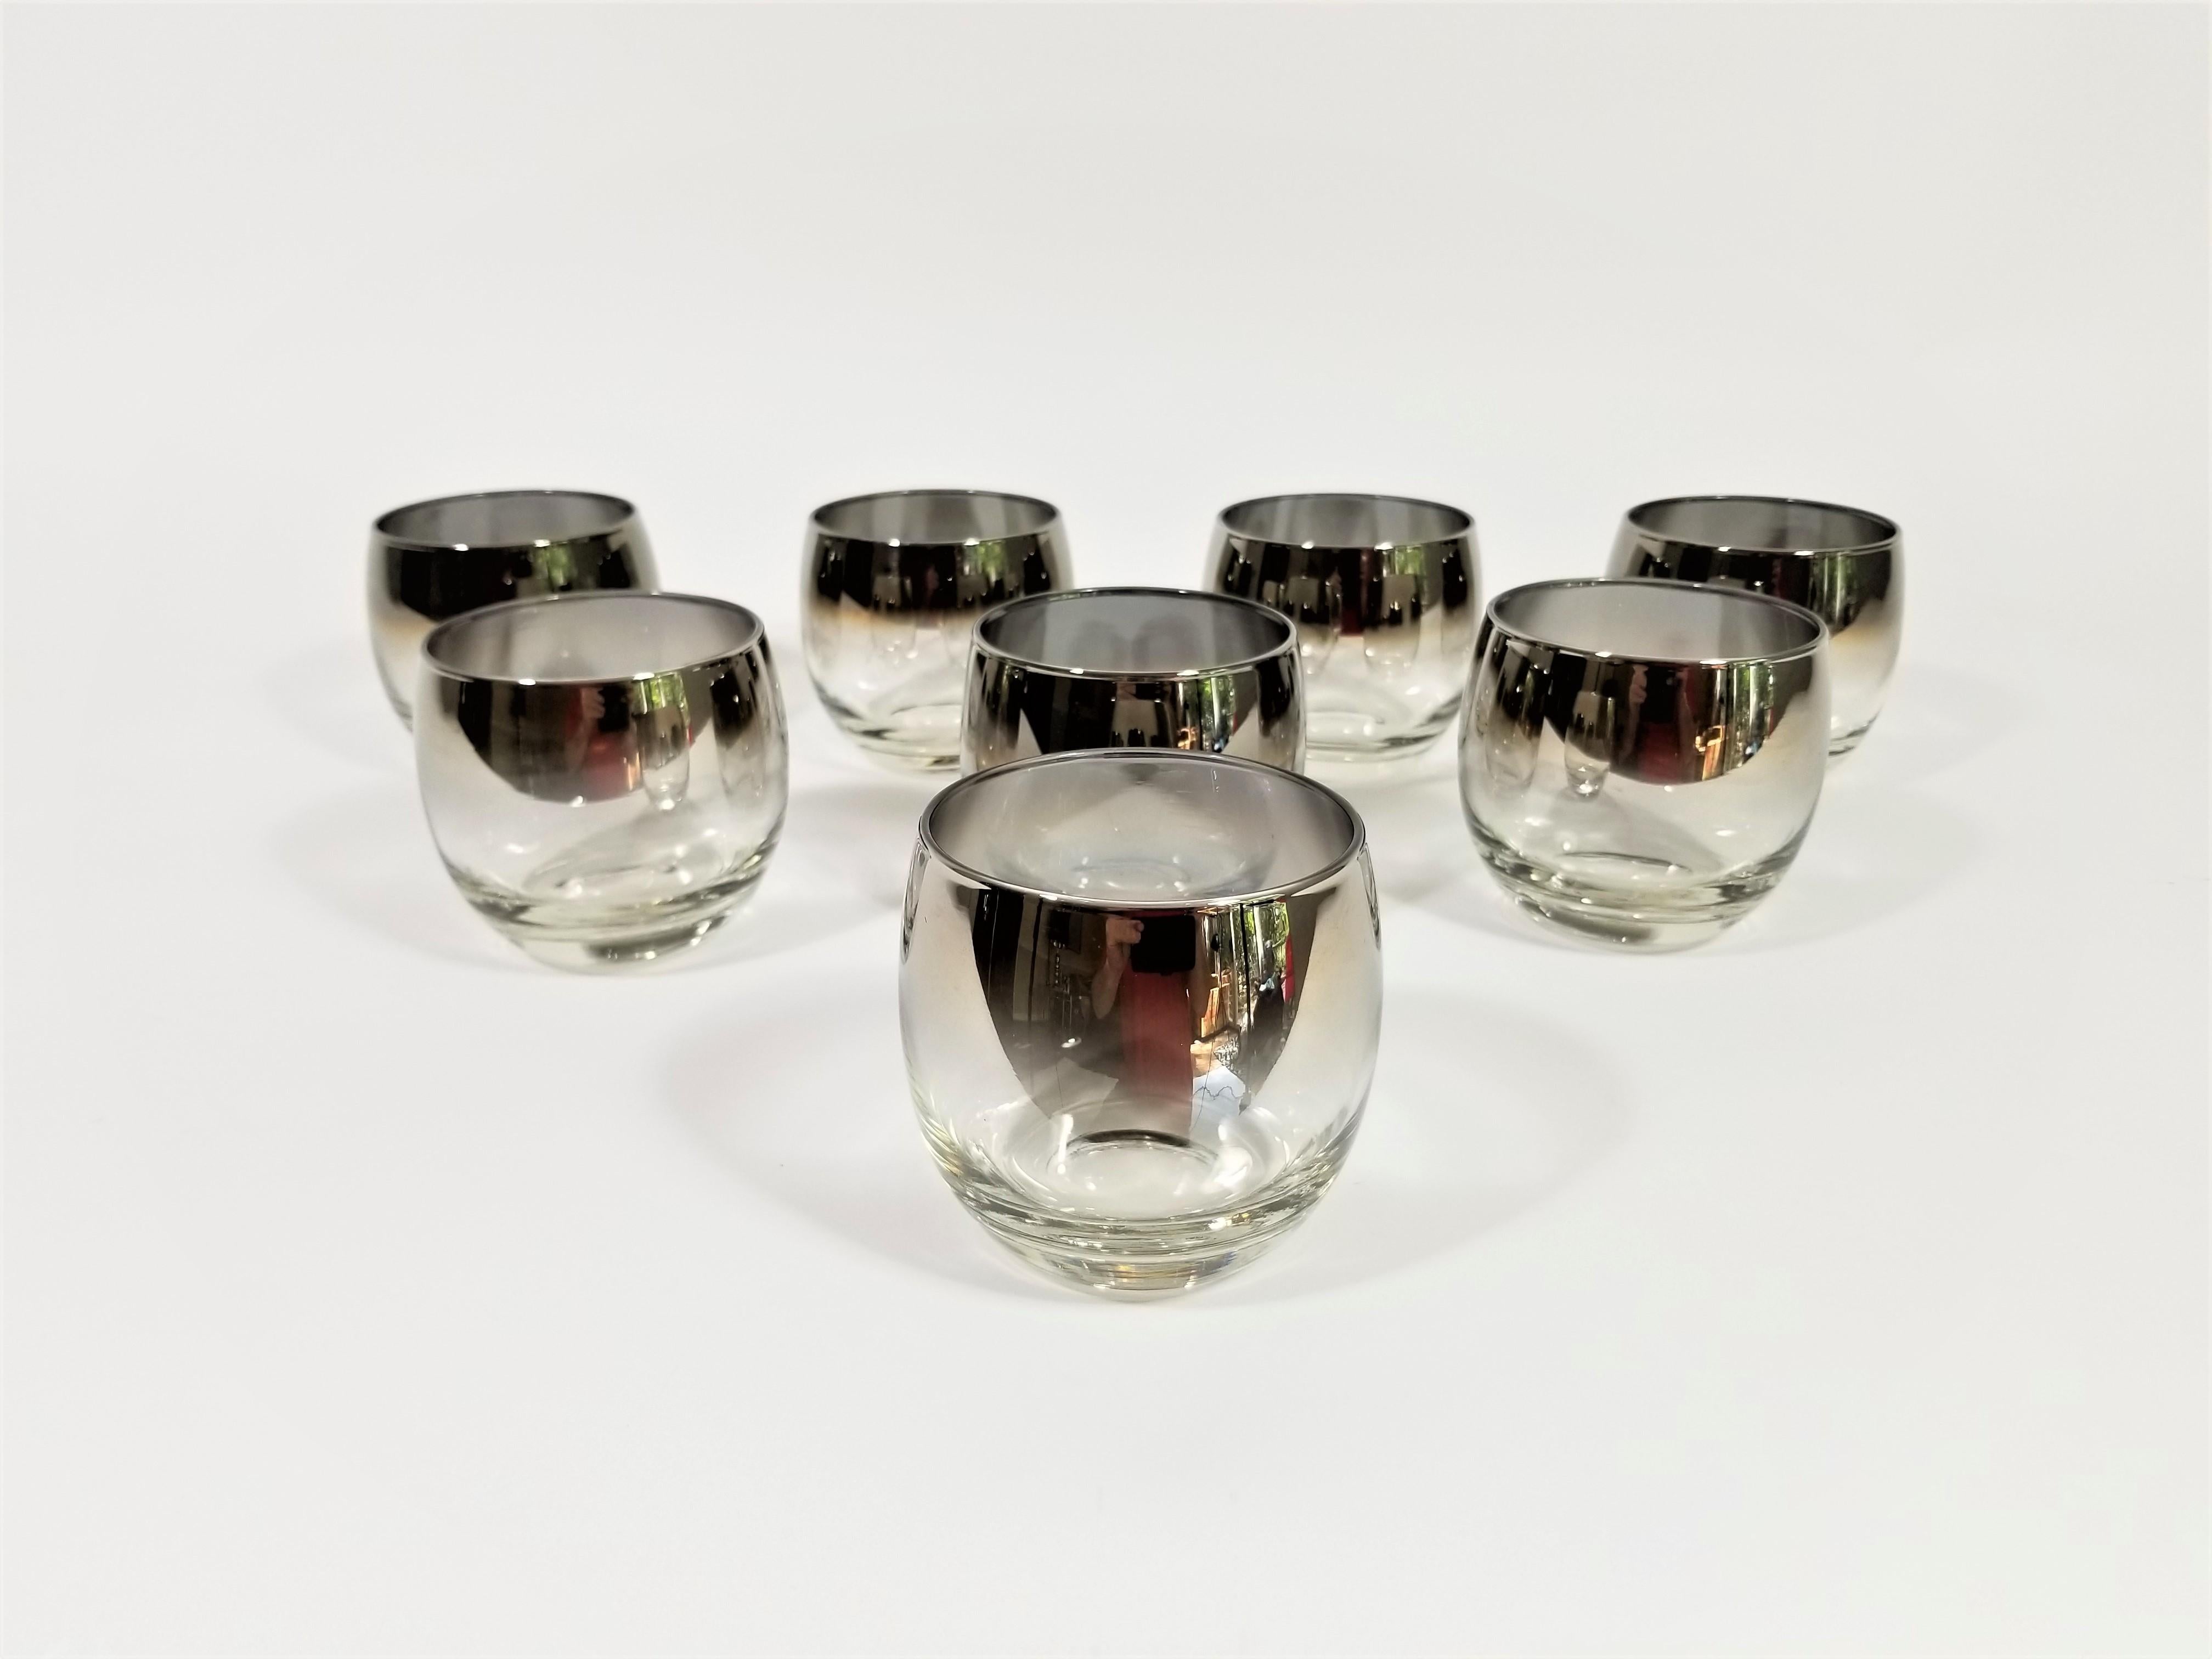 Midcentury Dorothy Thorpe Glassware often referred to as Roly Poly glasses due to their round shape. Silver Fade Design. Set of 8. 
Excellent condition.
Glass size:
Height 3.13 inches
Diameter 3.13 inches.